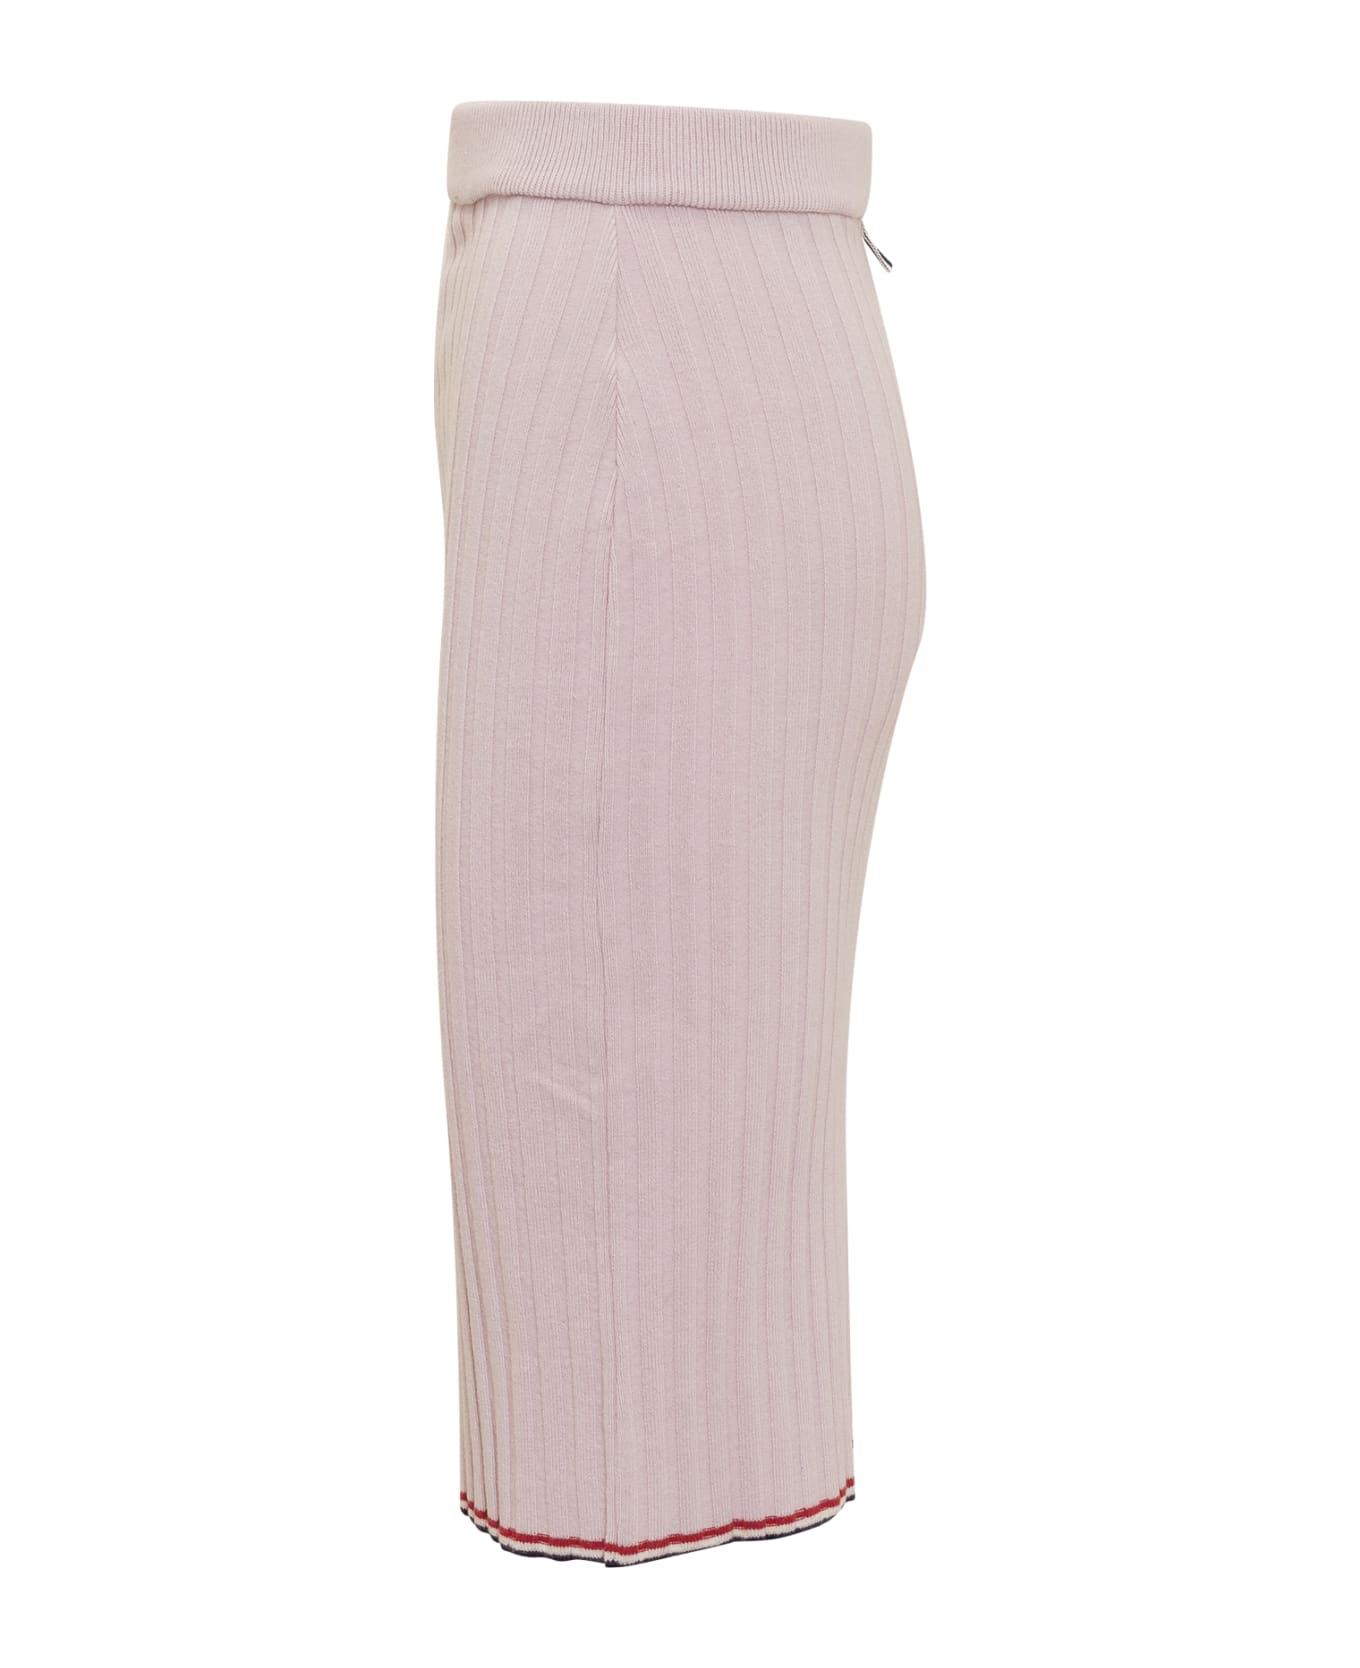 Thom Browne Skirt With Logo - PINK